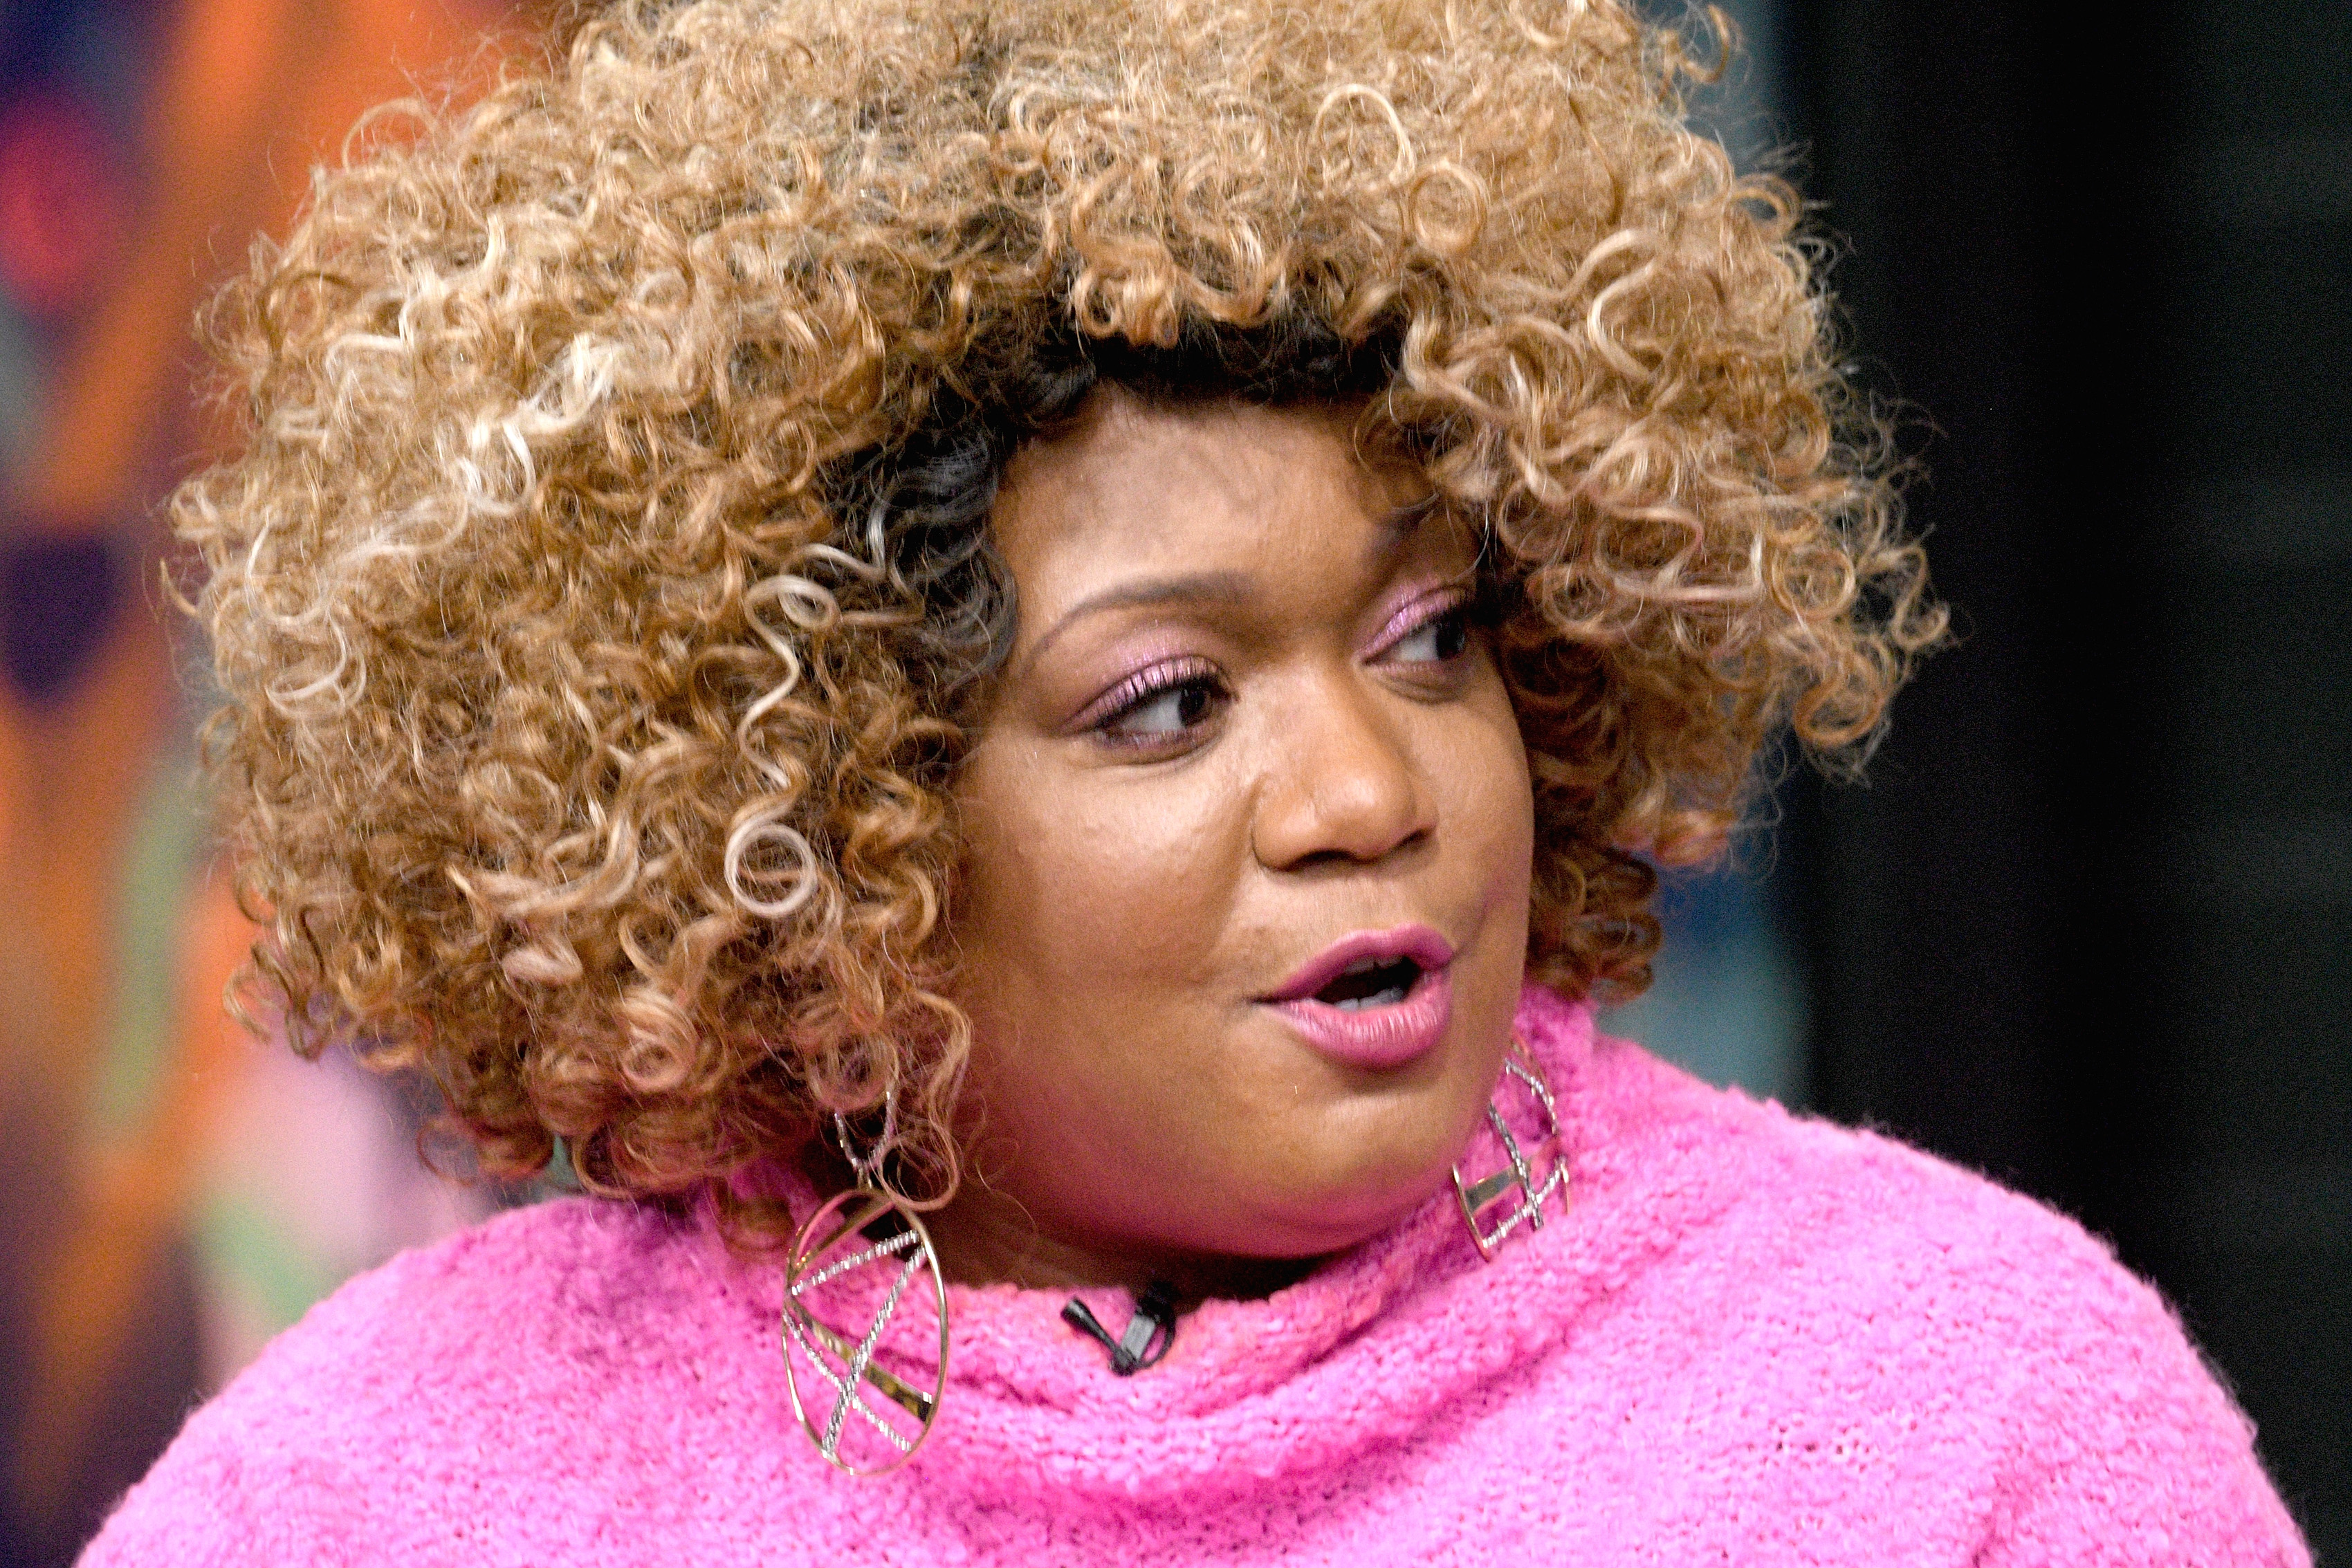 Food Network star Sunny Anderson wears a pink sweater in this photograph.